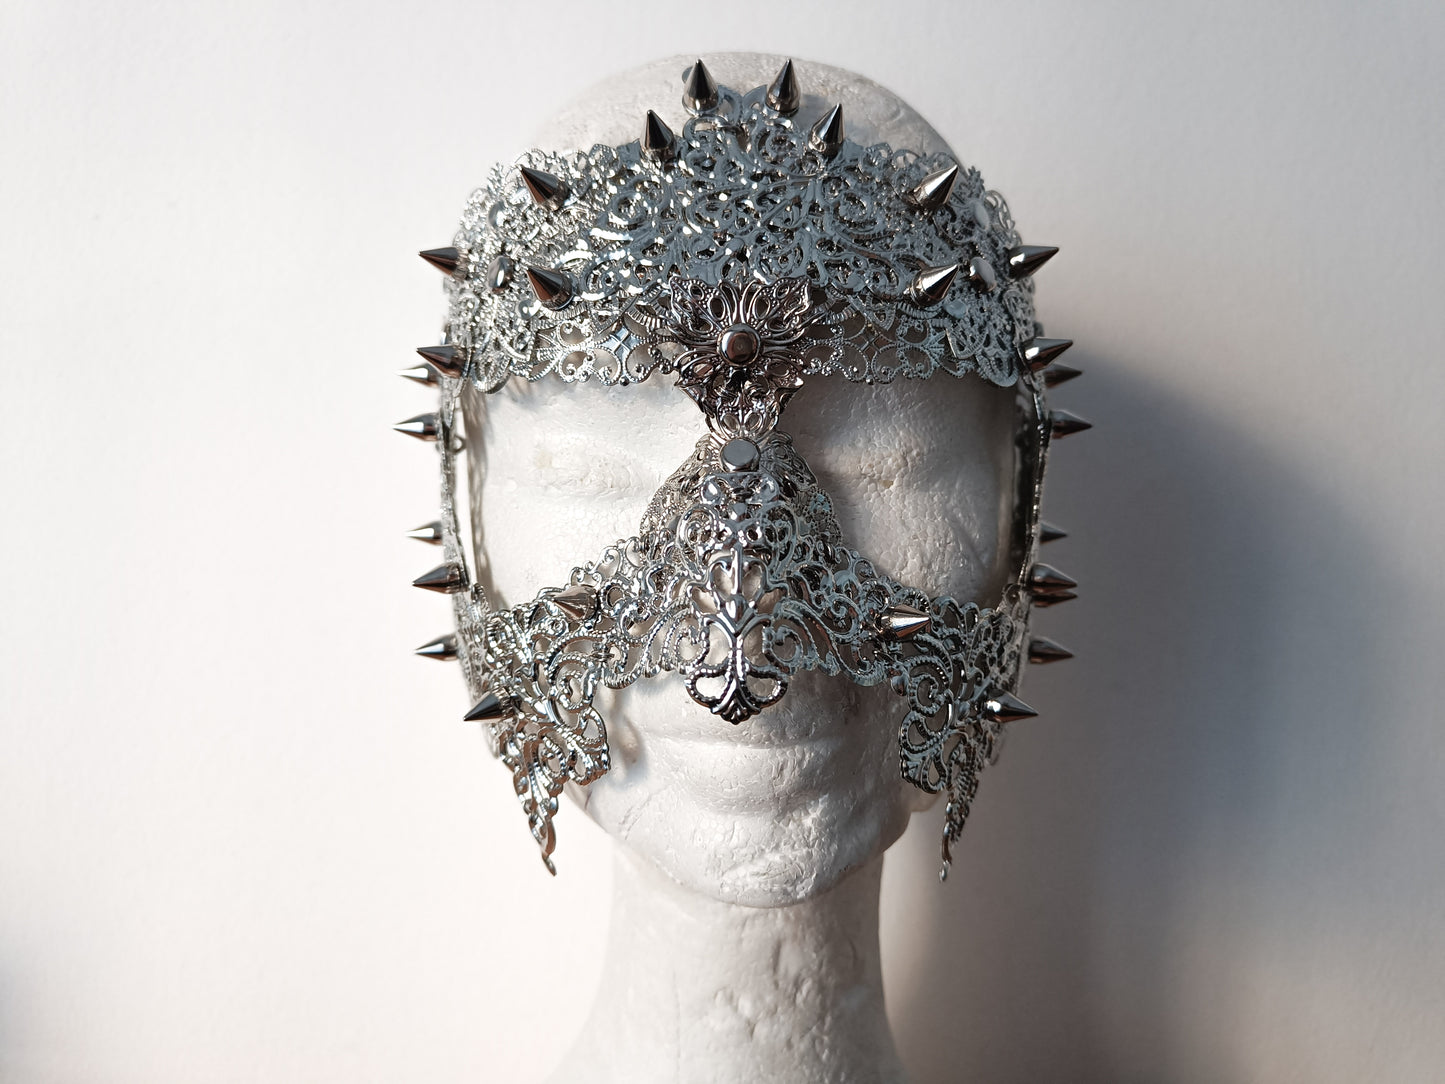  Myril Jewels full-face filigree mask, studded for a punk edge. This neo-gothic masterpiece is ideal for Halloween, festival wear, or as a dramatic statement piece, reflecting the dark-avantgarde essence for gothic and alternative style aficionados.